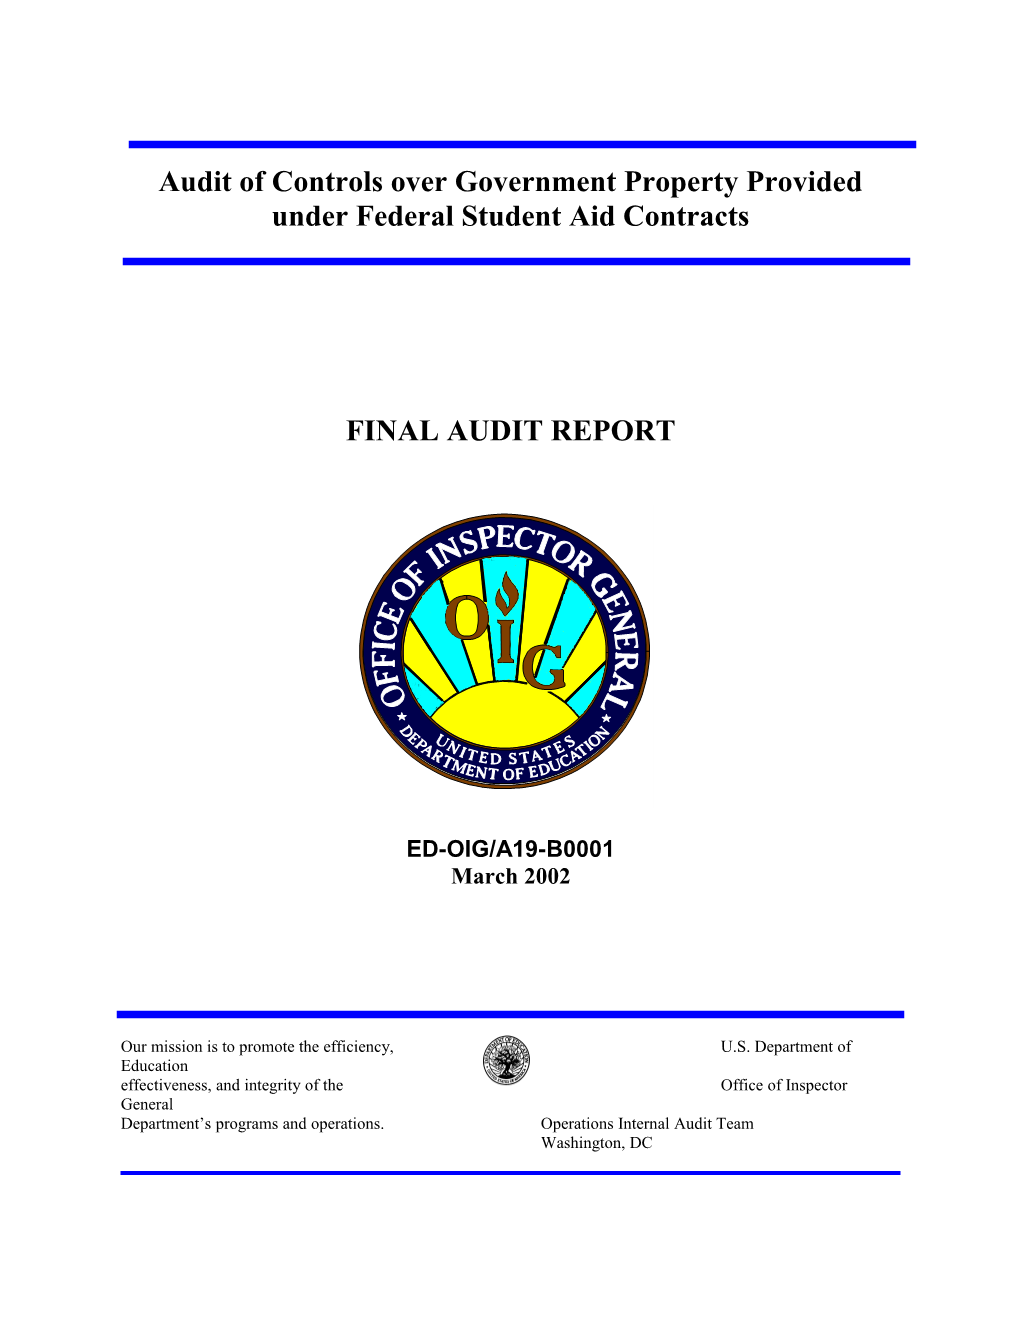 Audit of Controls Over Government Property Provided Under Federal Student Aid Contracts